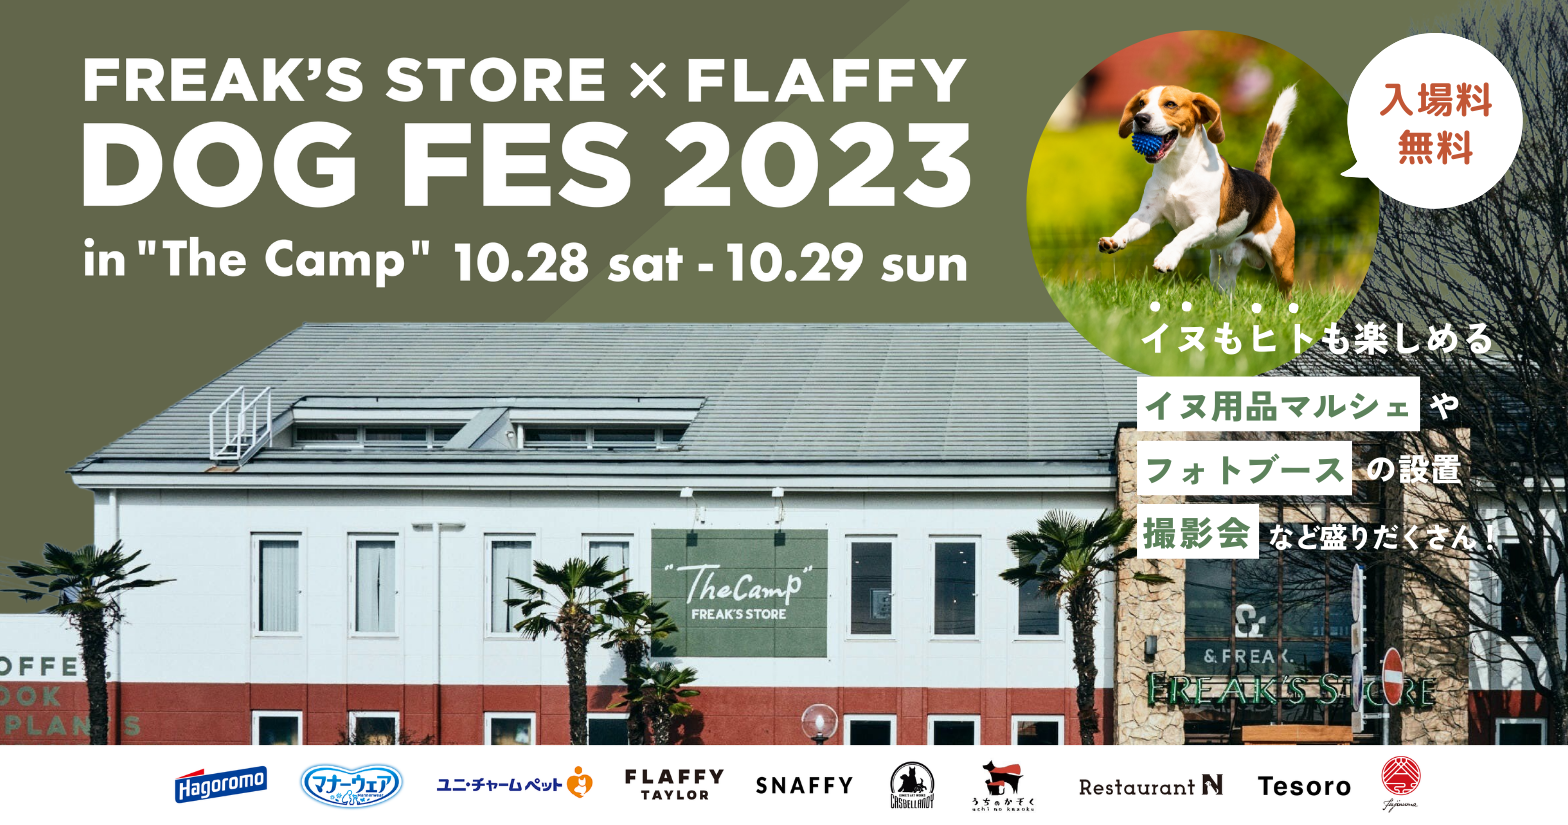 FLAFFY ~ FREAKfS STORE DOG FES 2023 in "The Camp"J